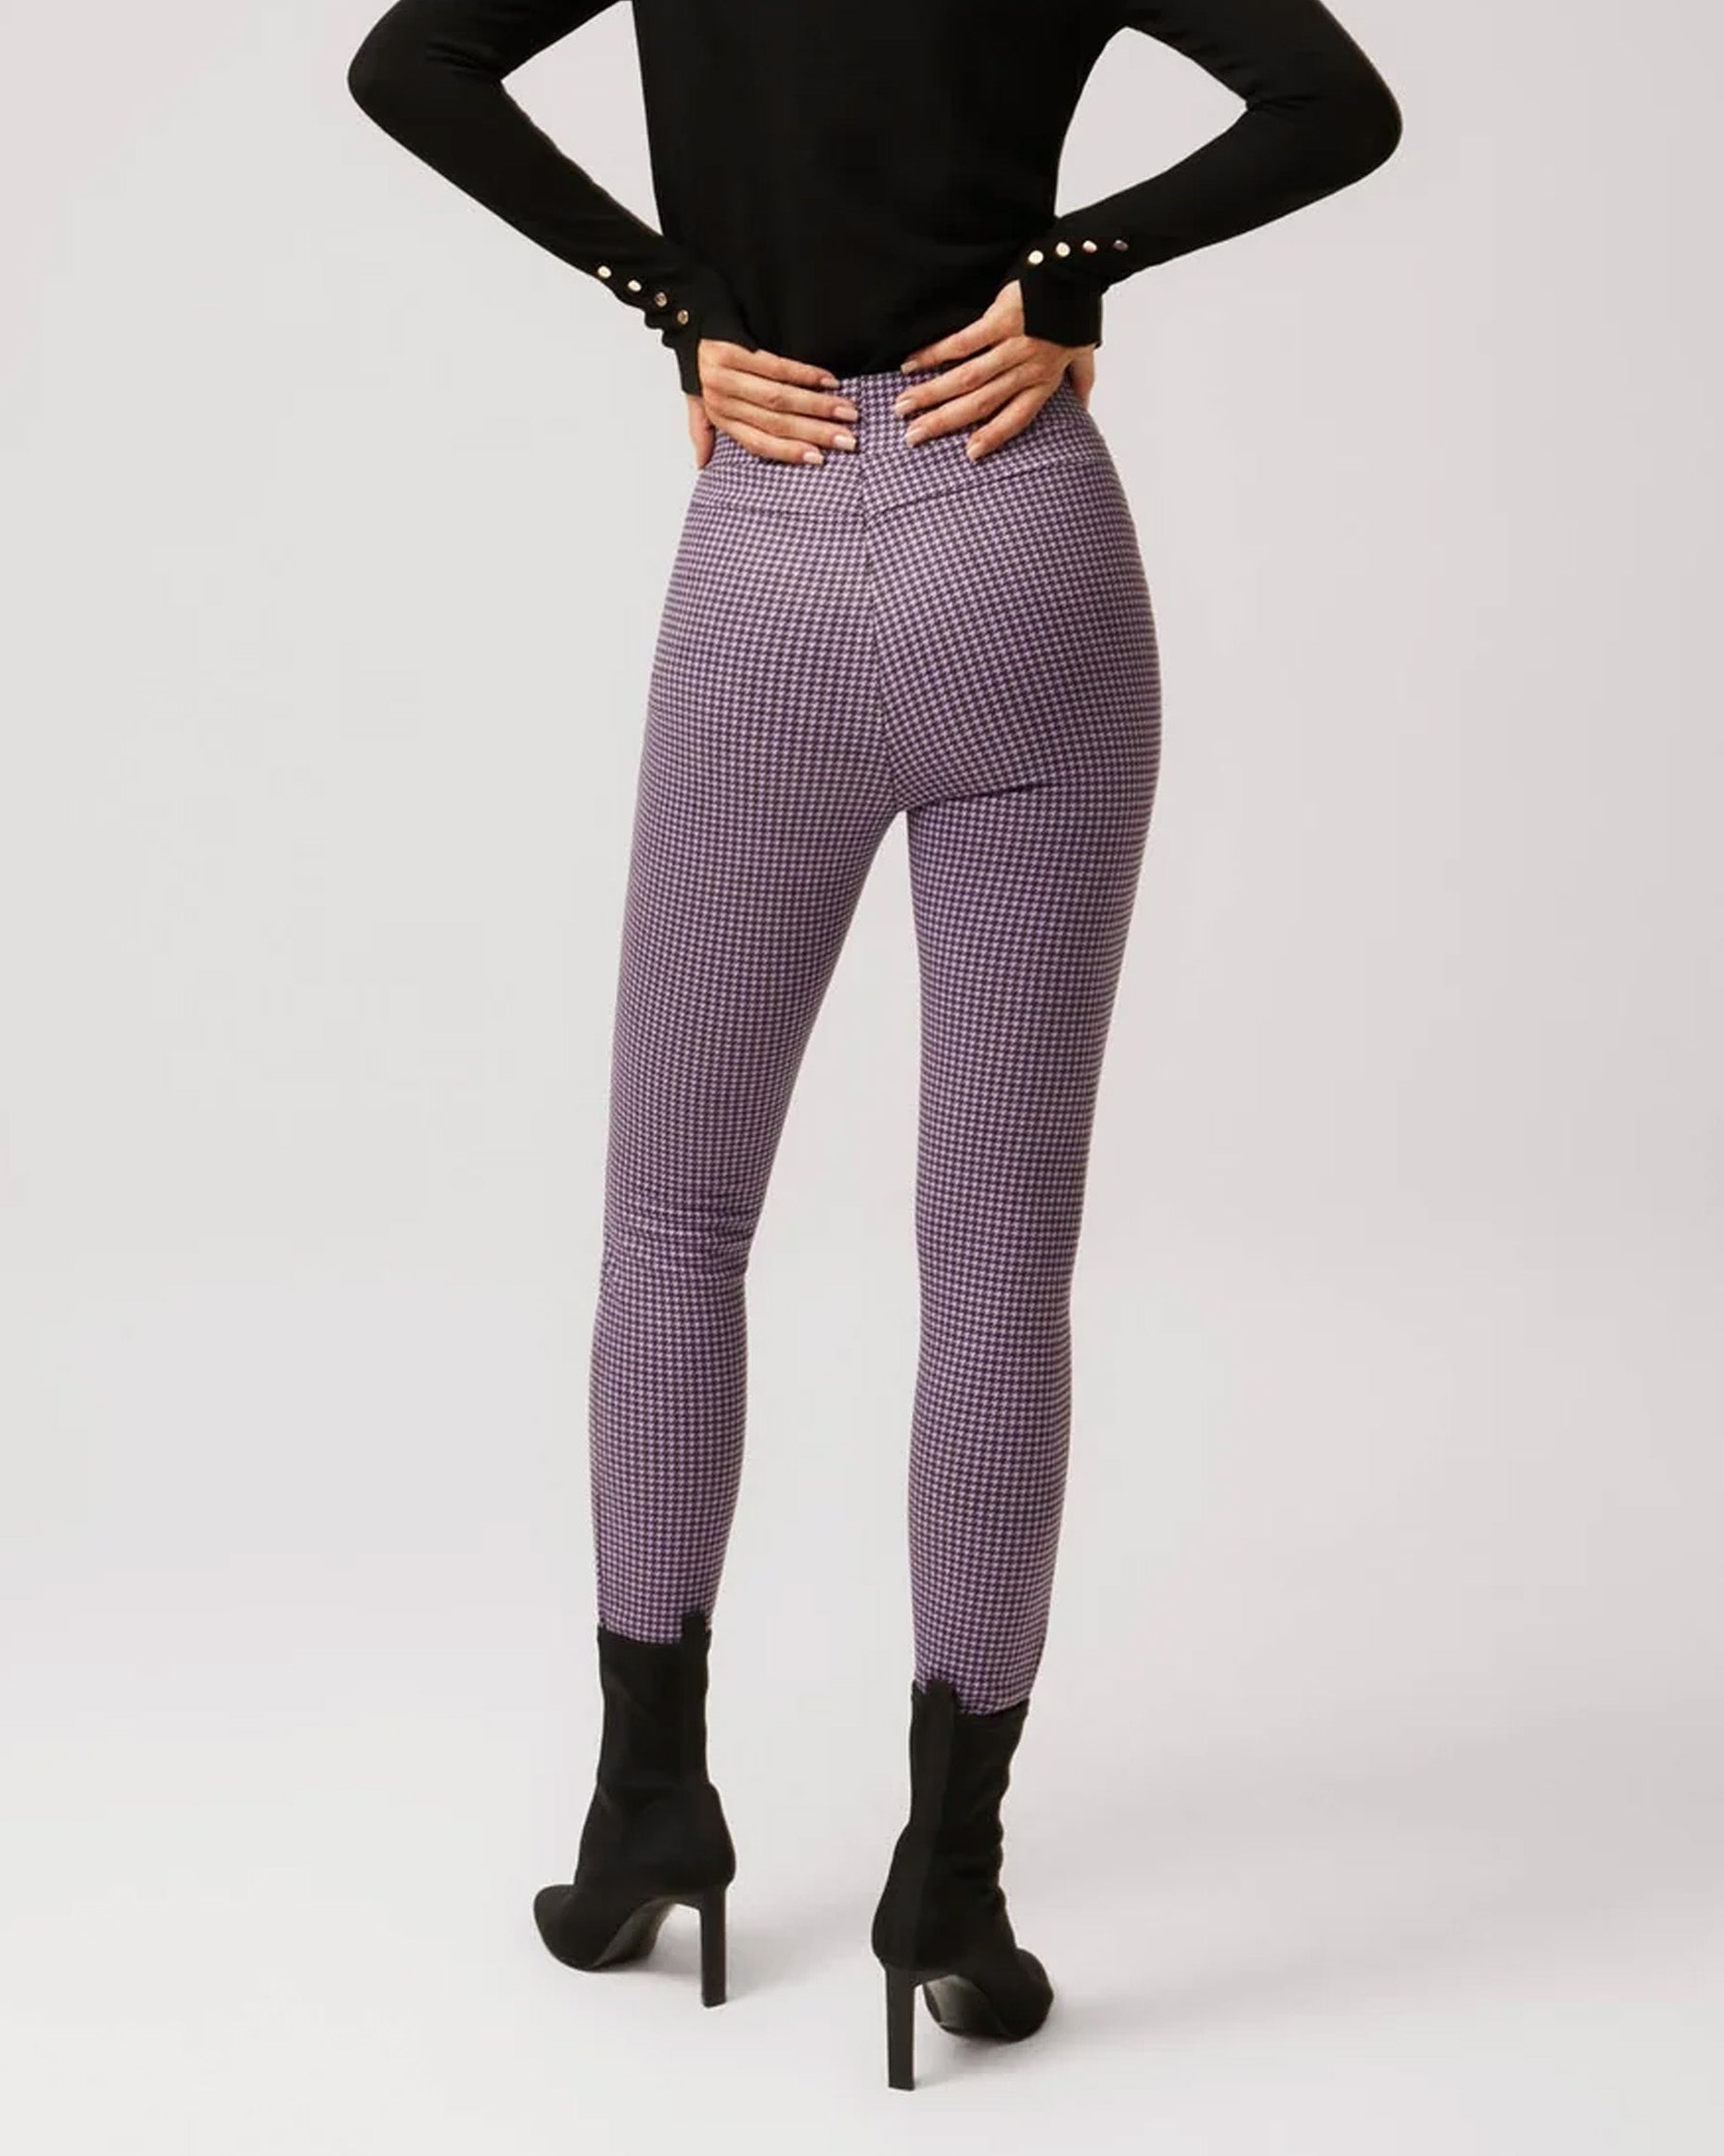 Ysabel Mora 70402 Houndstooth Leggings - High waisted purple trouser leggings with a black micro houndstooth style pattern.